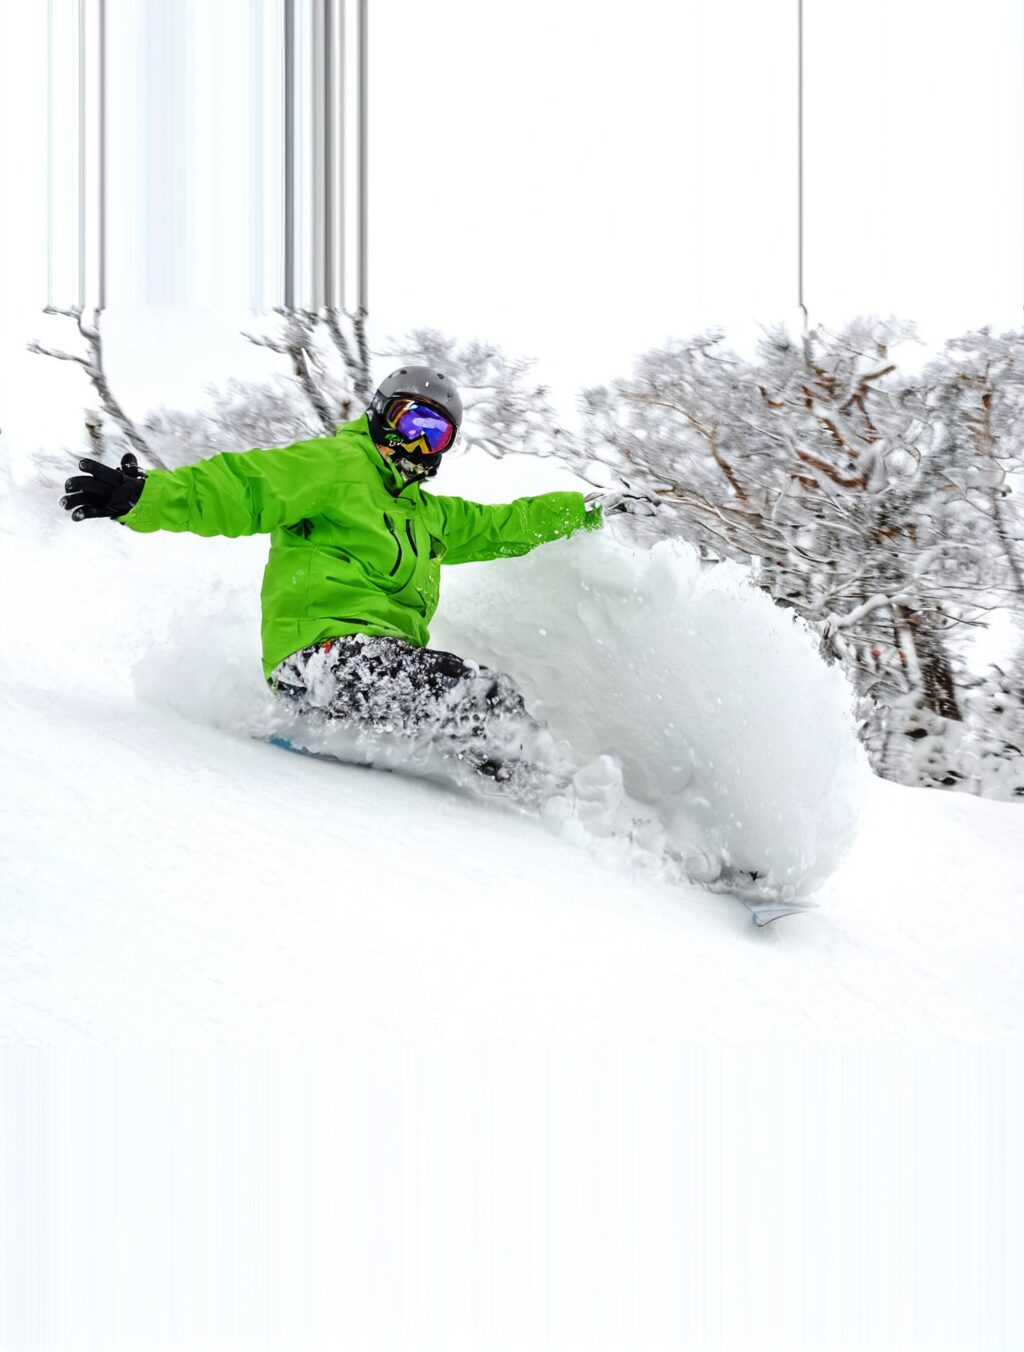 where is best to snowboard in japan